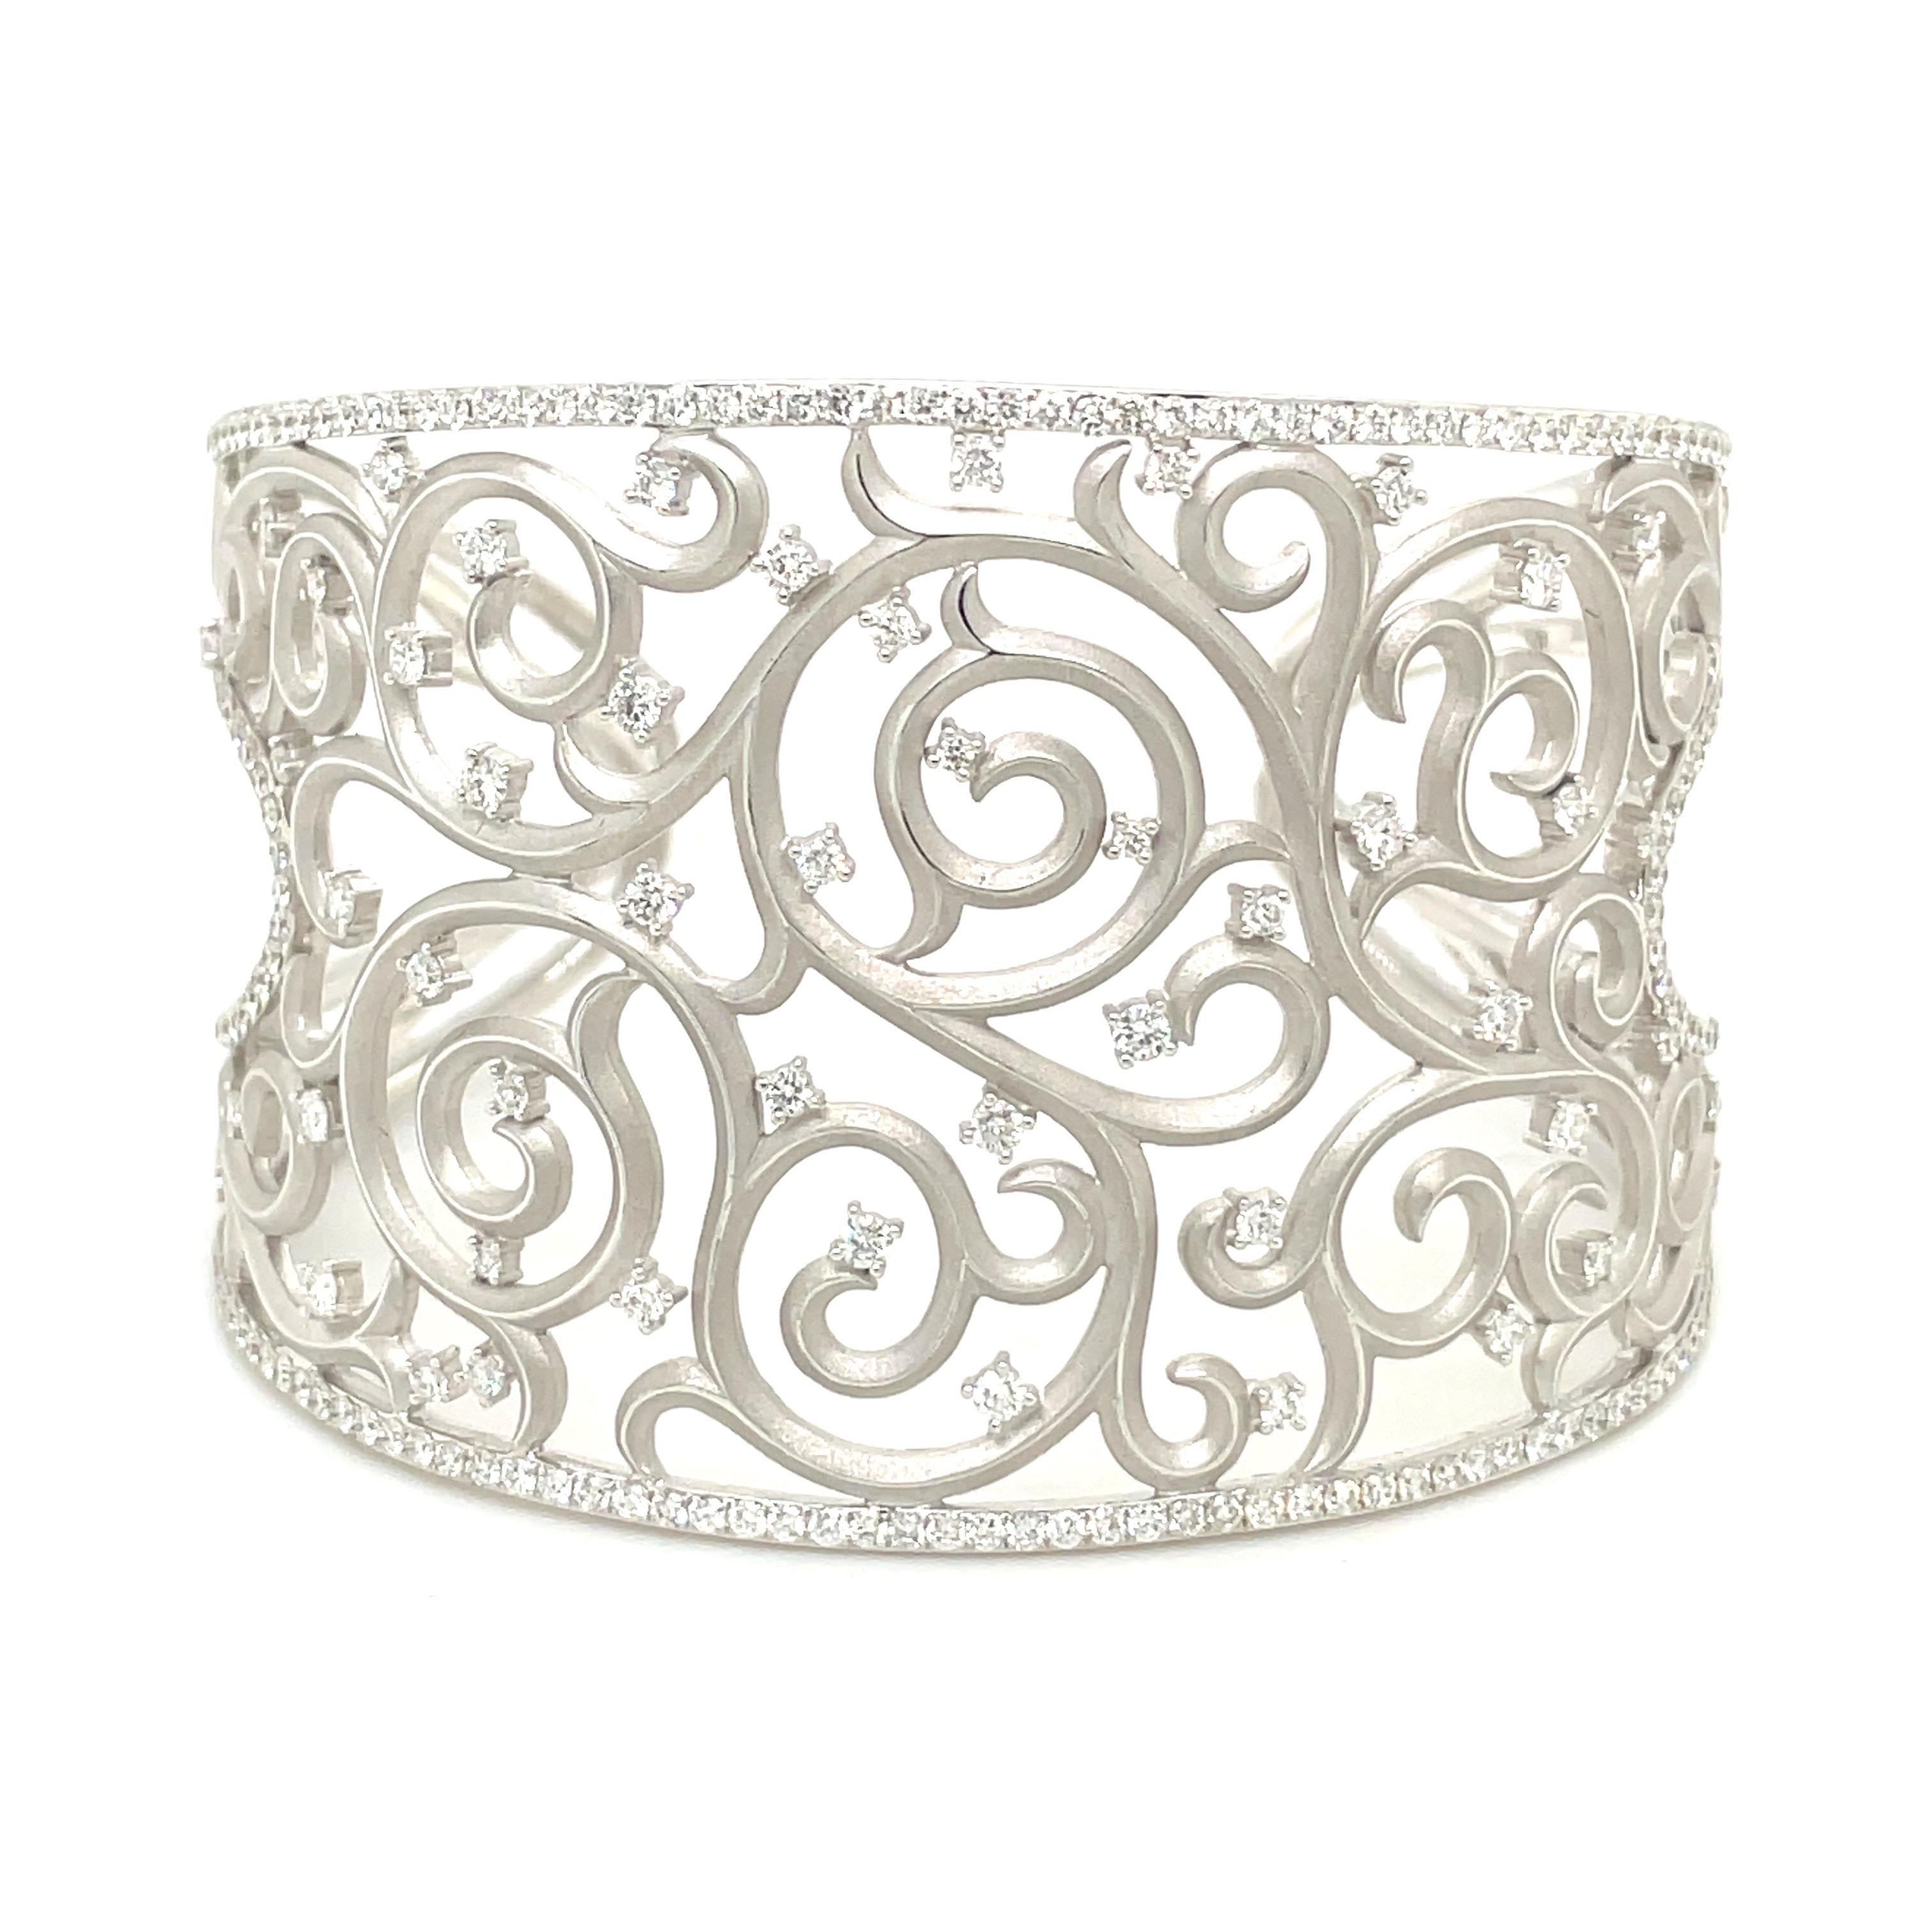 Cellini Jewelers lovely 18 karat white gold and diamond cuff bracelet. The very understated and elegant cuff is designed with a matte finished 18 karat white gold. The center is a swirl lace pattern tipped with round brilliant diamonds . A single